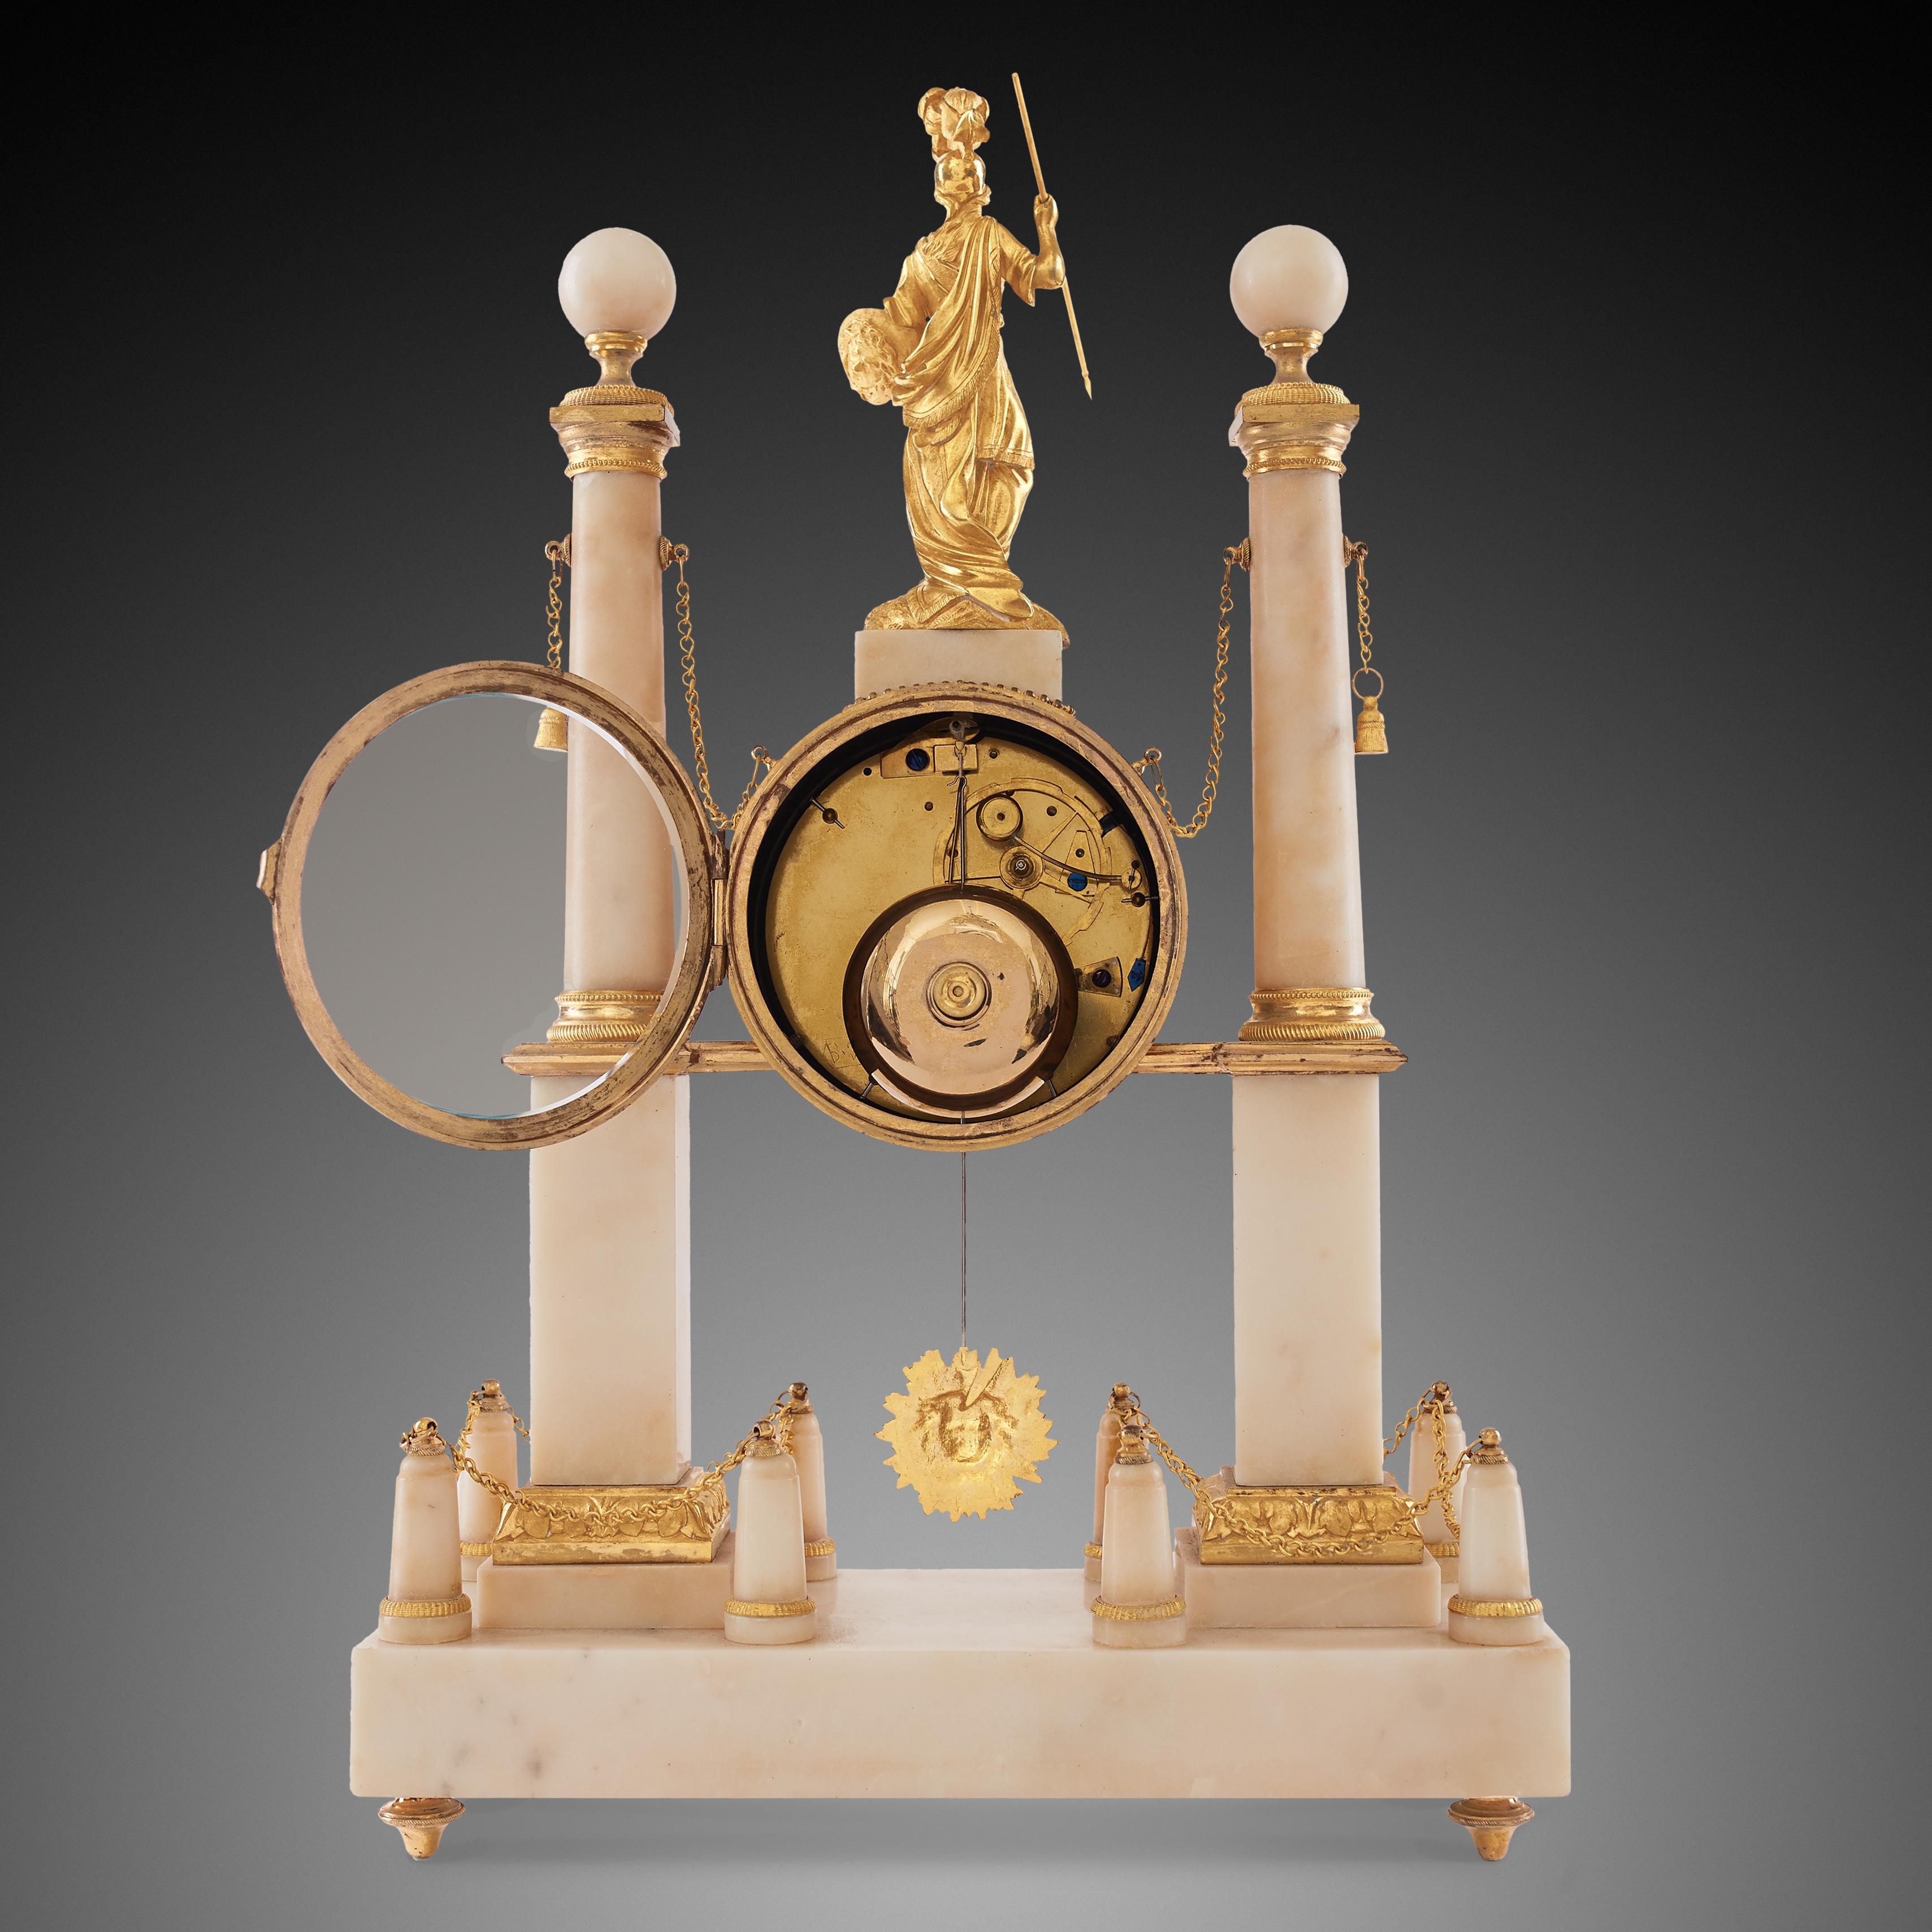 Mantel Clock 18th Century Louis XV Period by Gavelle Le Paris In Excellent Condition For Sale In Warsaw, PL